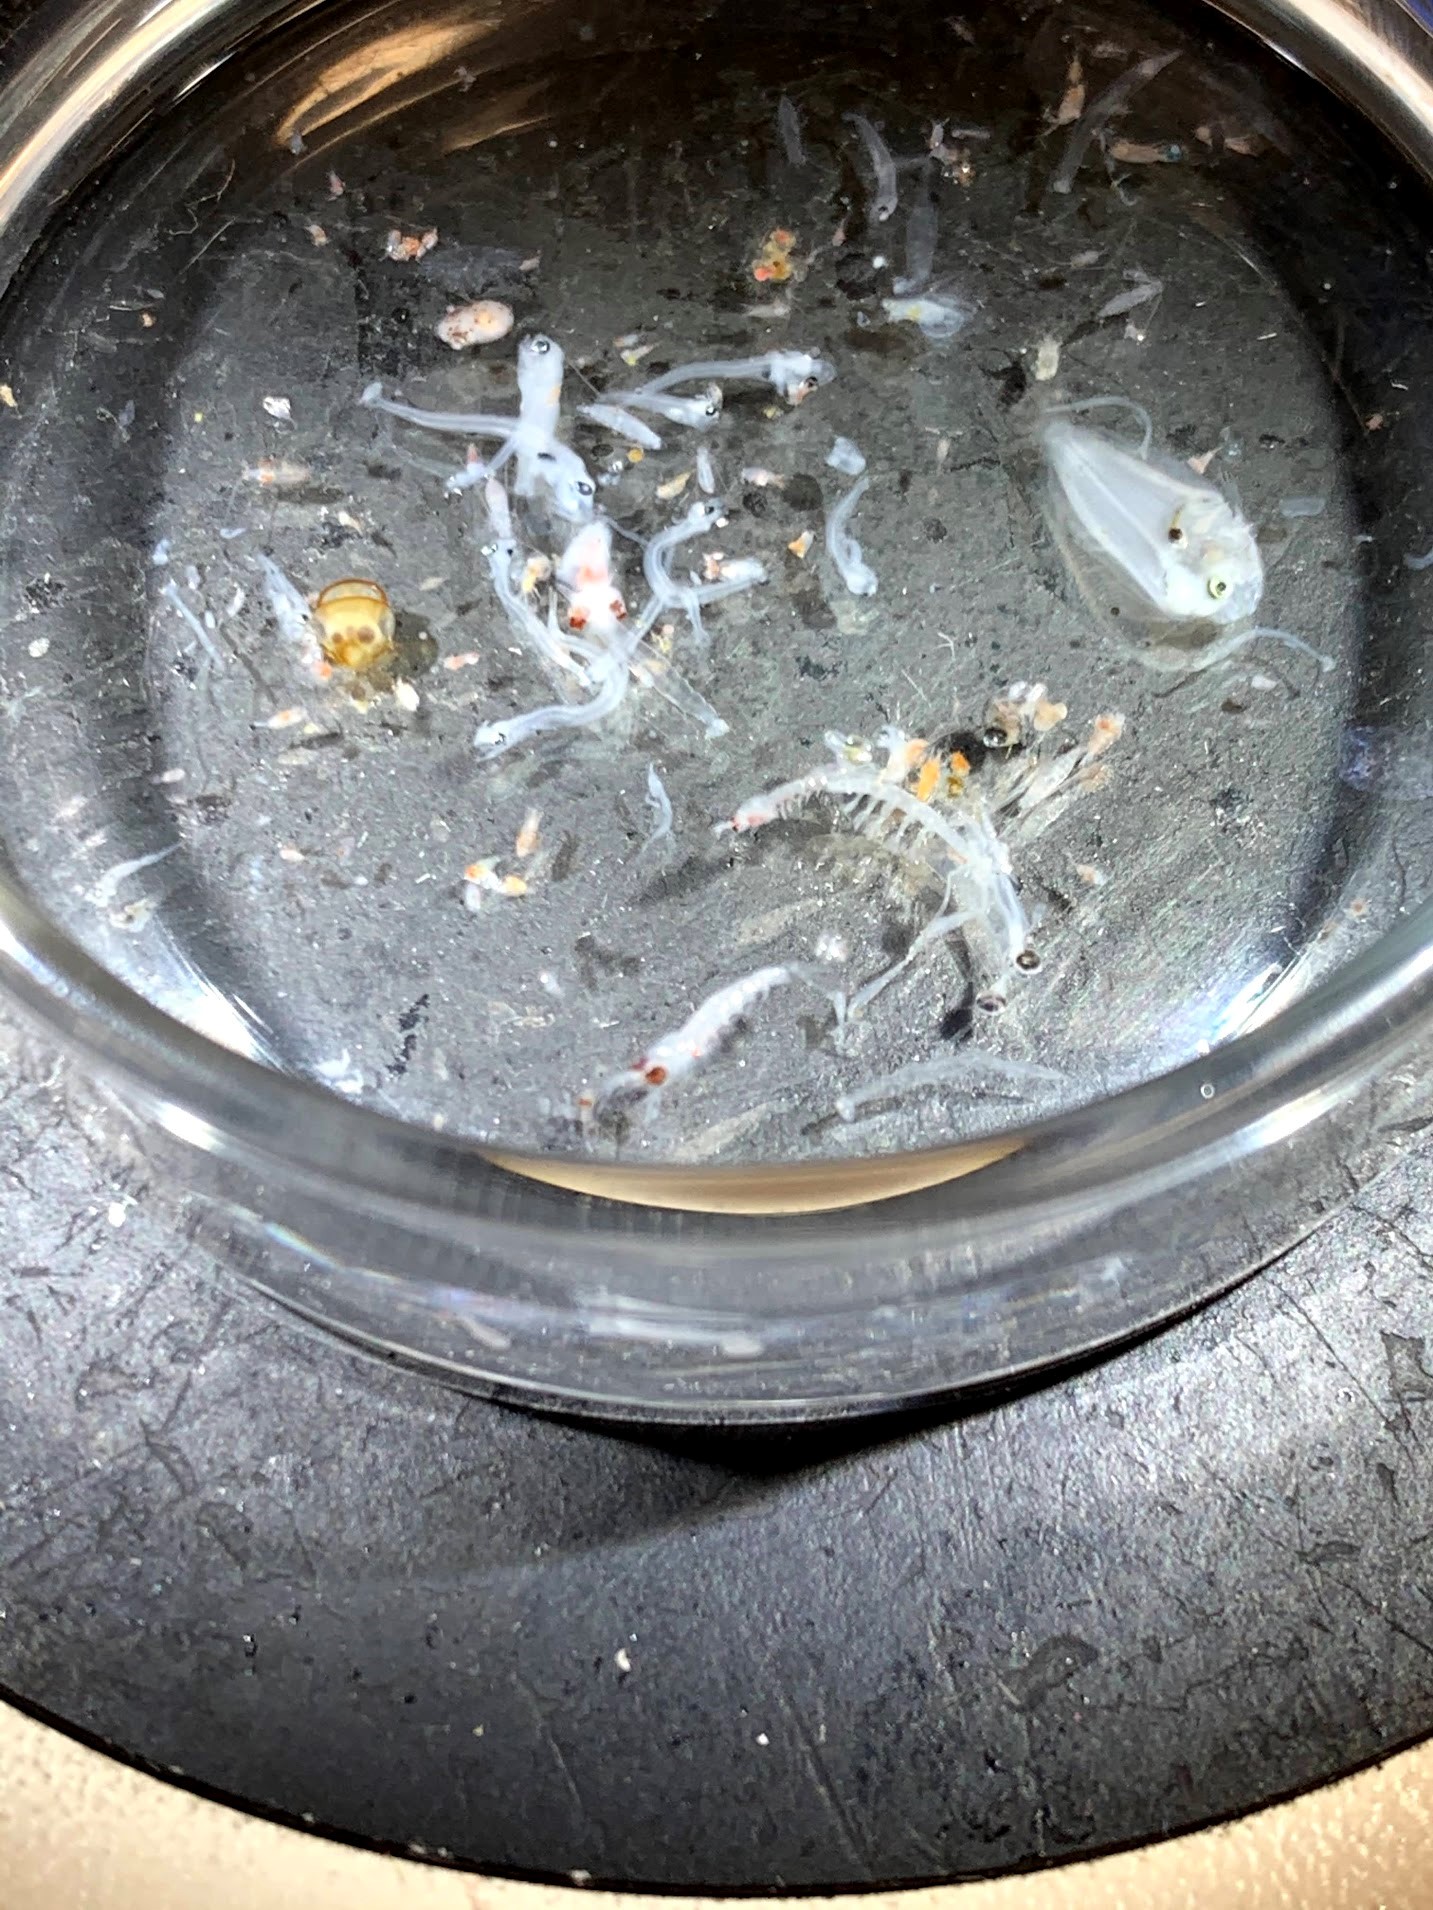 Various plankton and fish larvae collected in the ocean